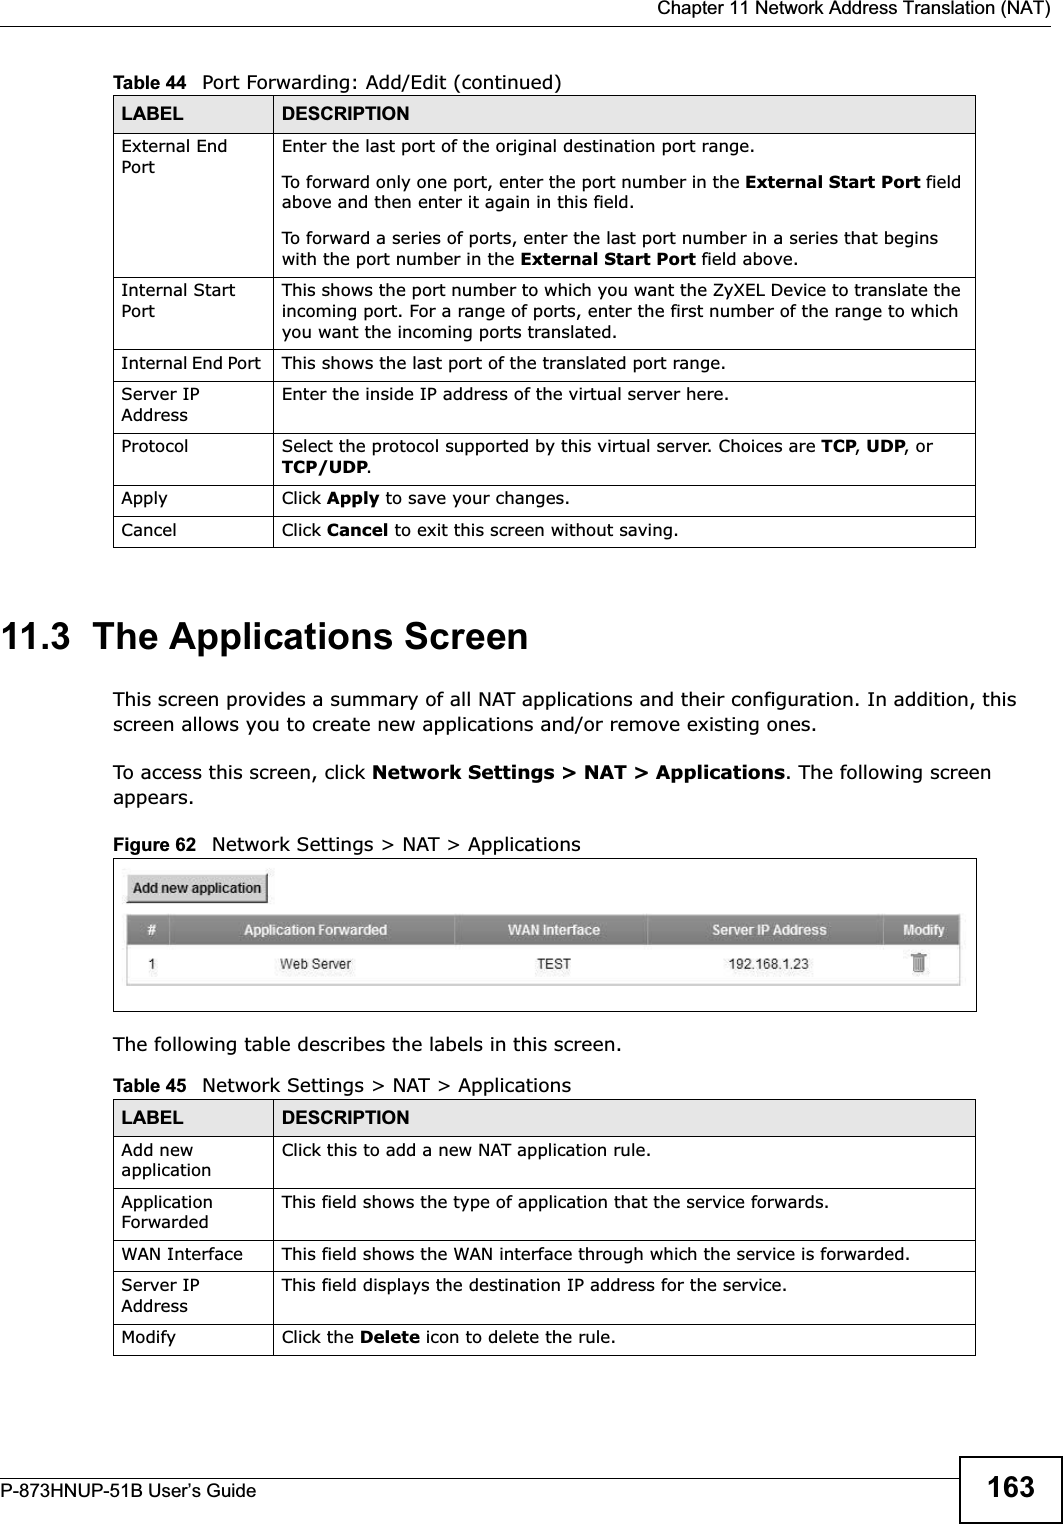  Chapter 11 Network Address Translation (NAT)P-873HNUP-51B User’s Guide 16311.3  The Applications ScreenThis screen provides a summary of all NAT applications and their configuration. In addition, this screen allows you to create new applications and/or remove existing ones.To access this screen, click Network Settings &gt; NAT &gt; Applications. The following screen appears.Figure 62   Network Settings &gt; NAT &gt; ApplicationsThe following table describes the labels in this screen. External End Port Enter the last port of the original destination port range. To forward only one port, enter the port number in the External Start Port fieldabove and then enter it again in this field. To forward a series of ports, enter the last port number in a series that begins with the port number in the External Start Port field above.Internal Start PortThis shows the port number to which you want the ZyXEL Device to translate the incoming port. For a range of ports, enter the first number of the range to which you want the incoming ports translated.Internal End Port  This shows the last port of the translated port range.Server IP AddressEnter the inside IP address of the virtual server here.Protocol Select the protocol supported by this virtual server. Choices are TCP,UDP, or TCP/UDP.Apply Click Apply to save your changes.Cancel Click Cancel to exit this screen without saving.Table 44   Port Forwarding: Add/Edit (continued)LABEL DESCRIPTIONTable 45   Network Settings &gt; NAT &gt; ApplicationsLABEL DESCRIPTIONAdd new applicationClick this to add a new NAT application rule.Application ForwardedThis field shows the type of application that the service forwards.WAN Interface This field shows the WAN interface through which the service is forwarded.Server IP AddressThis field displays the destination IP address for the service.Modify Click the Delete icon to delete the rule.